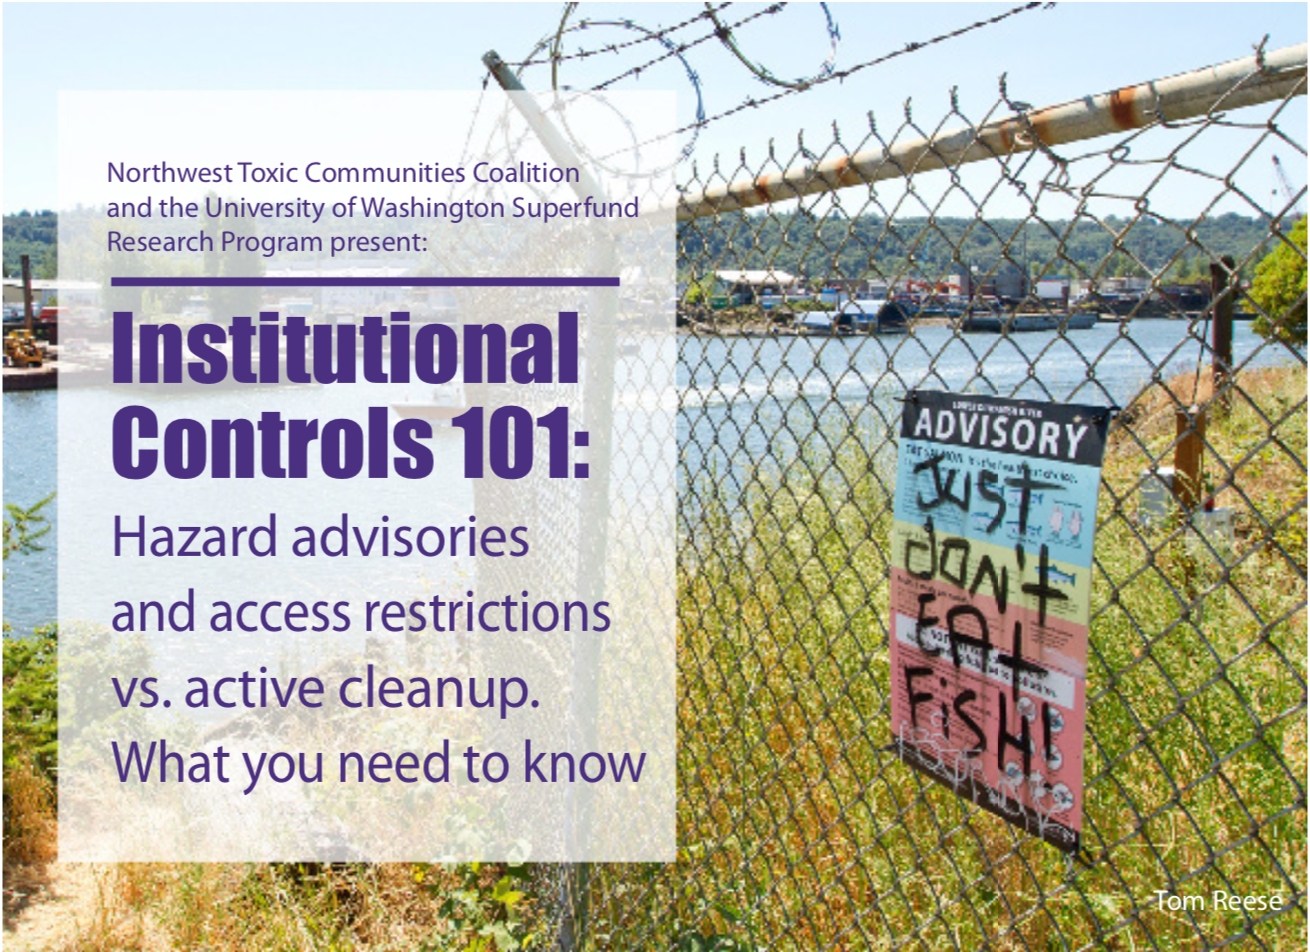 The title of the webinar superimposed on a photo of the Duwamish River with a chainlink fence in the foreground and a fishing advisory sign which has been spray-painted to read "Just don't eat fish."